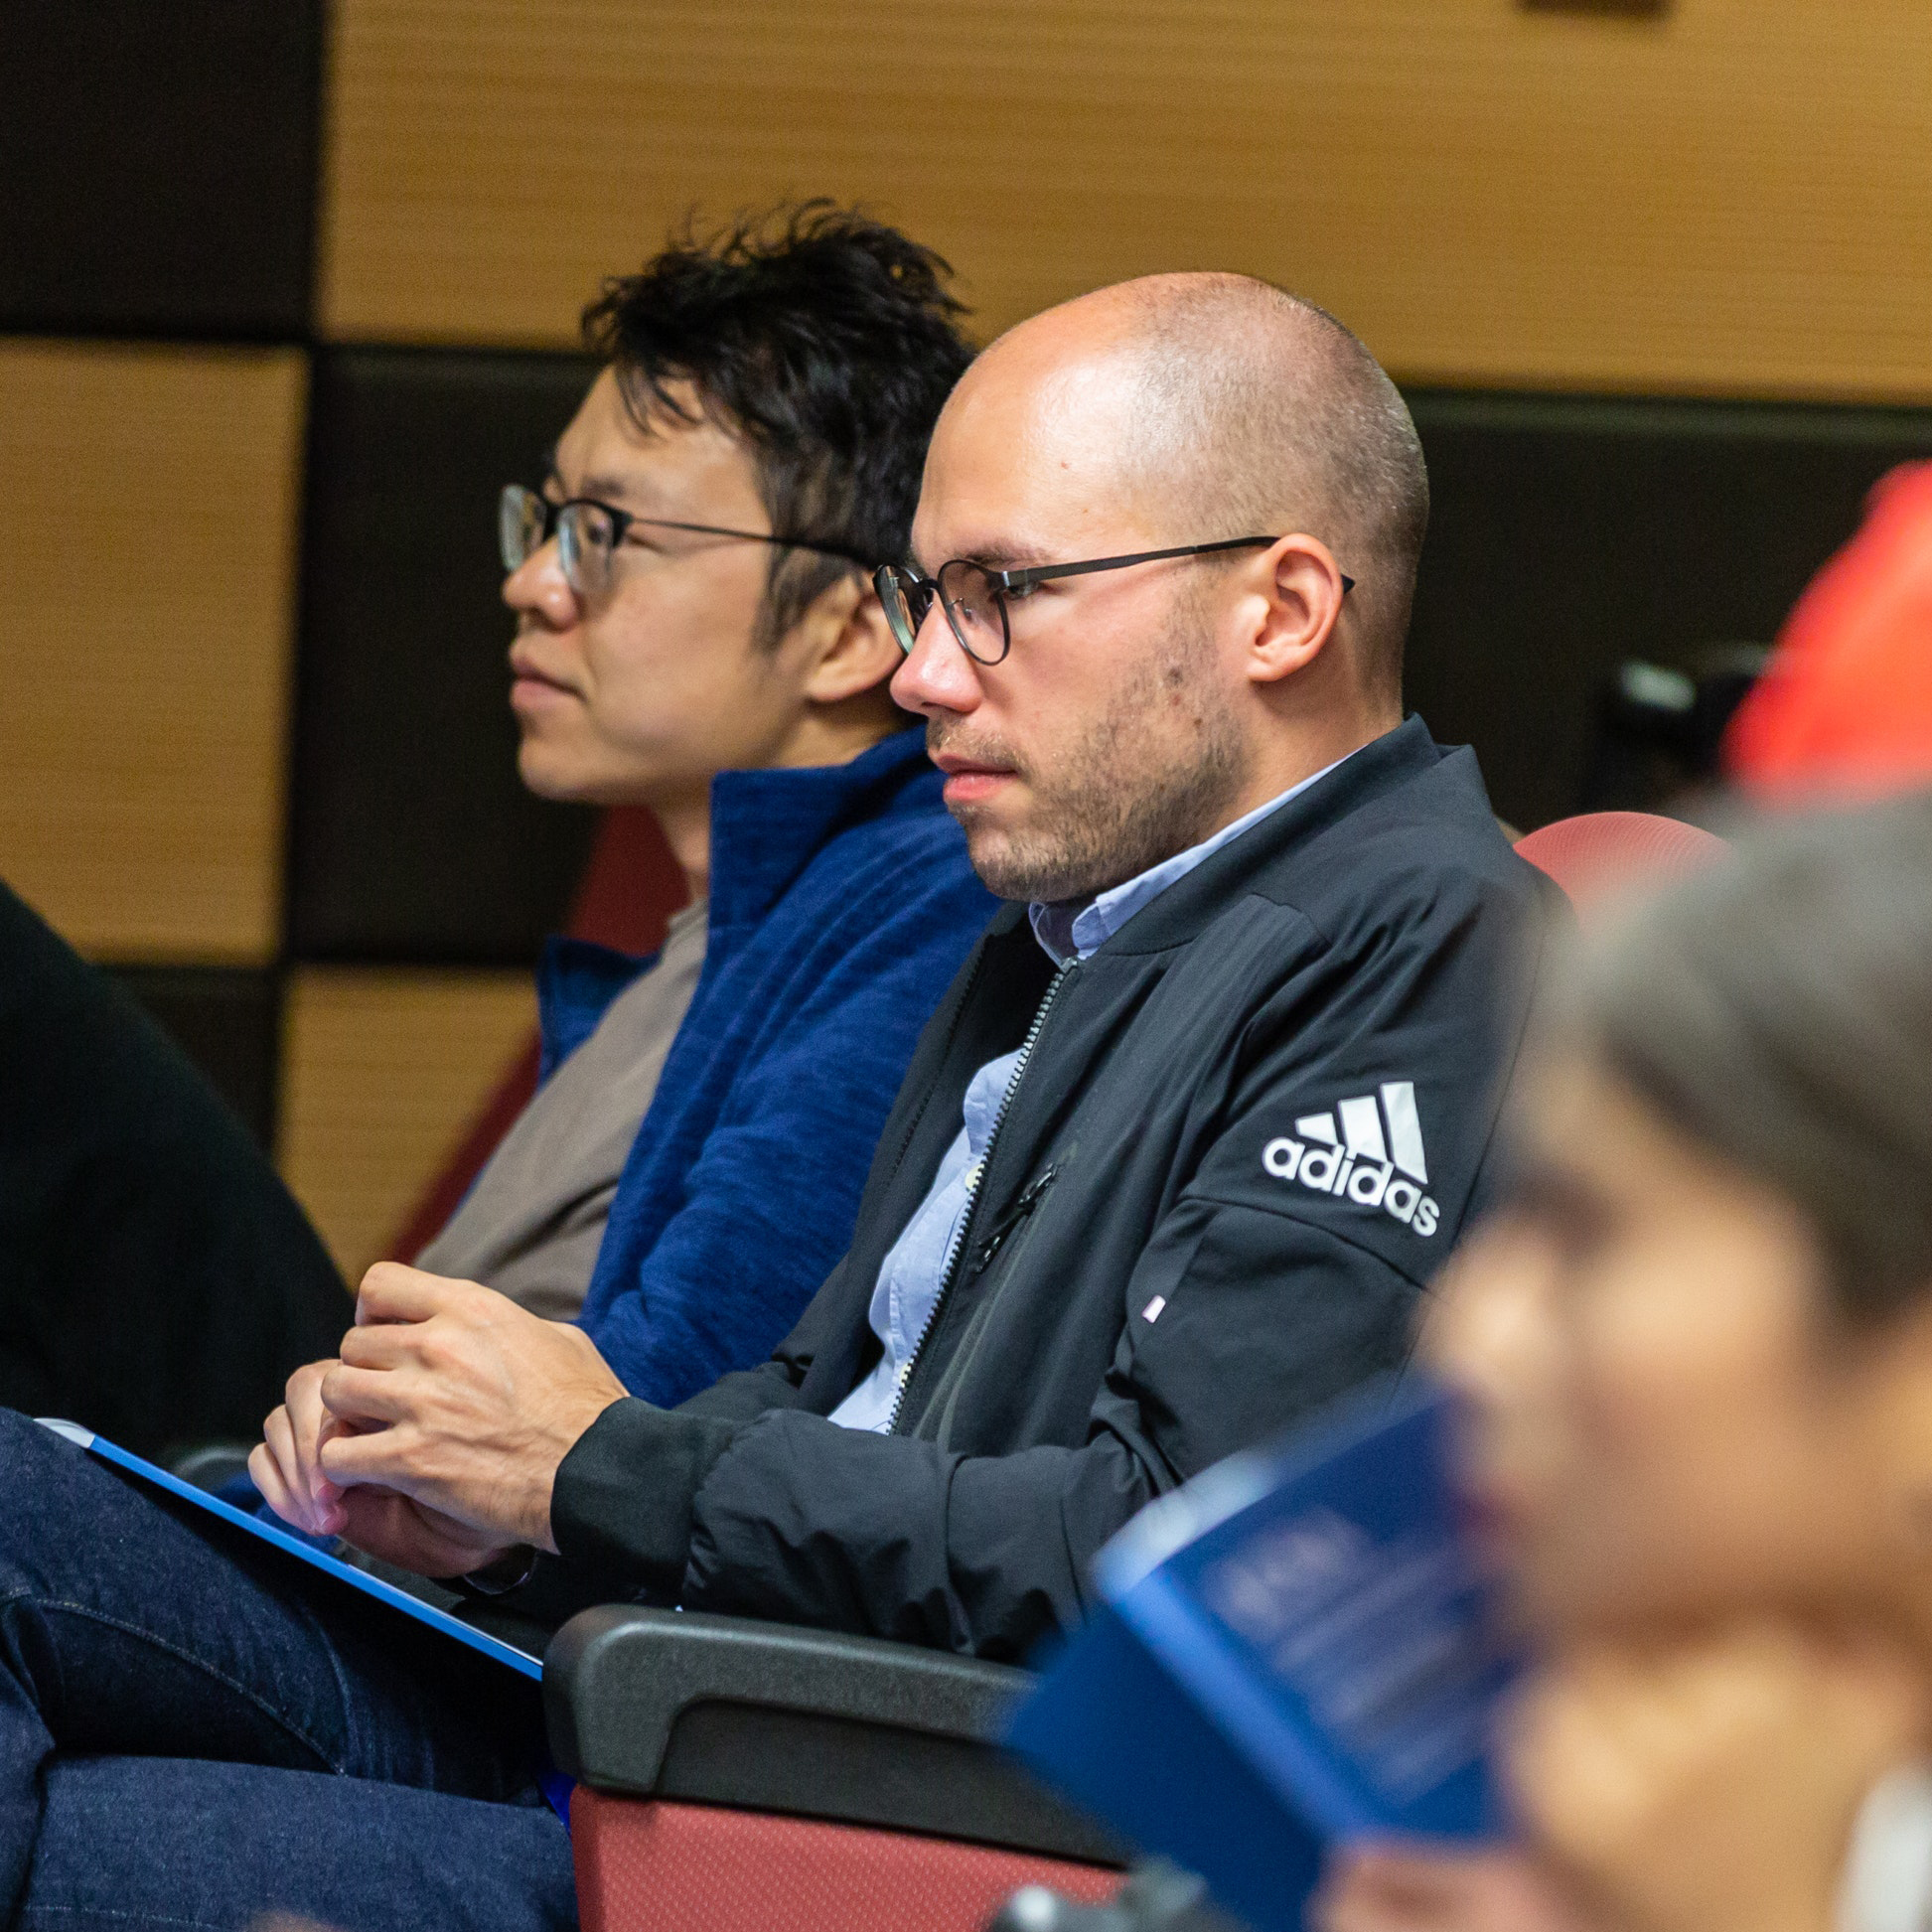 Some participants sitting at an event in a lecture hall.